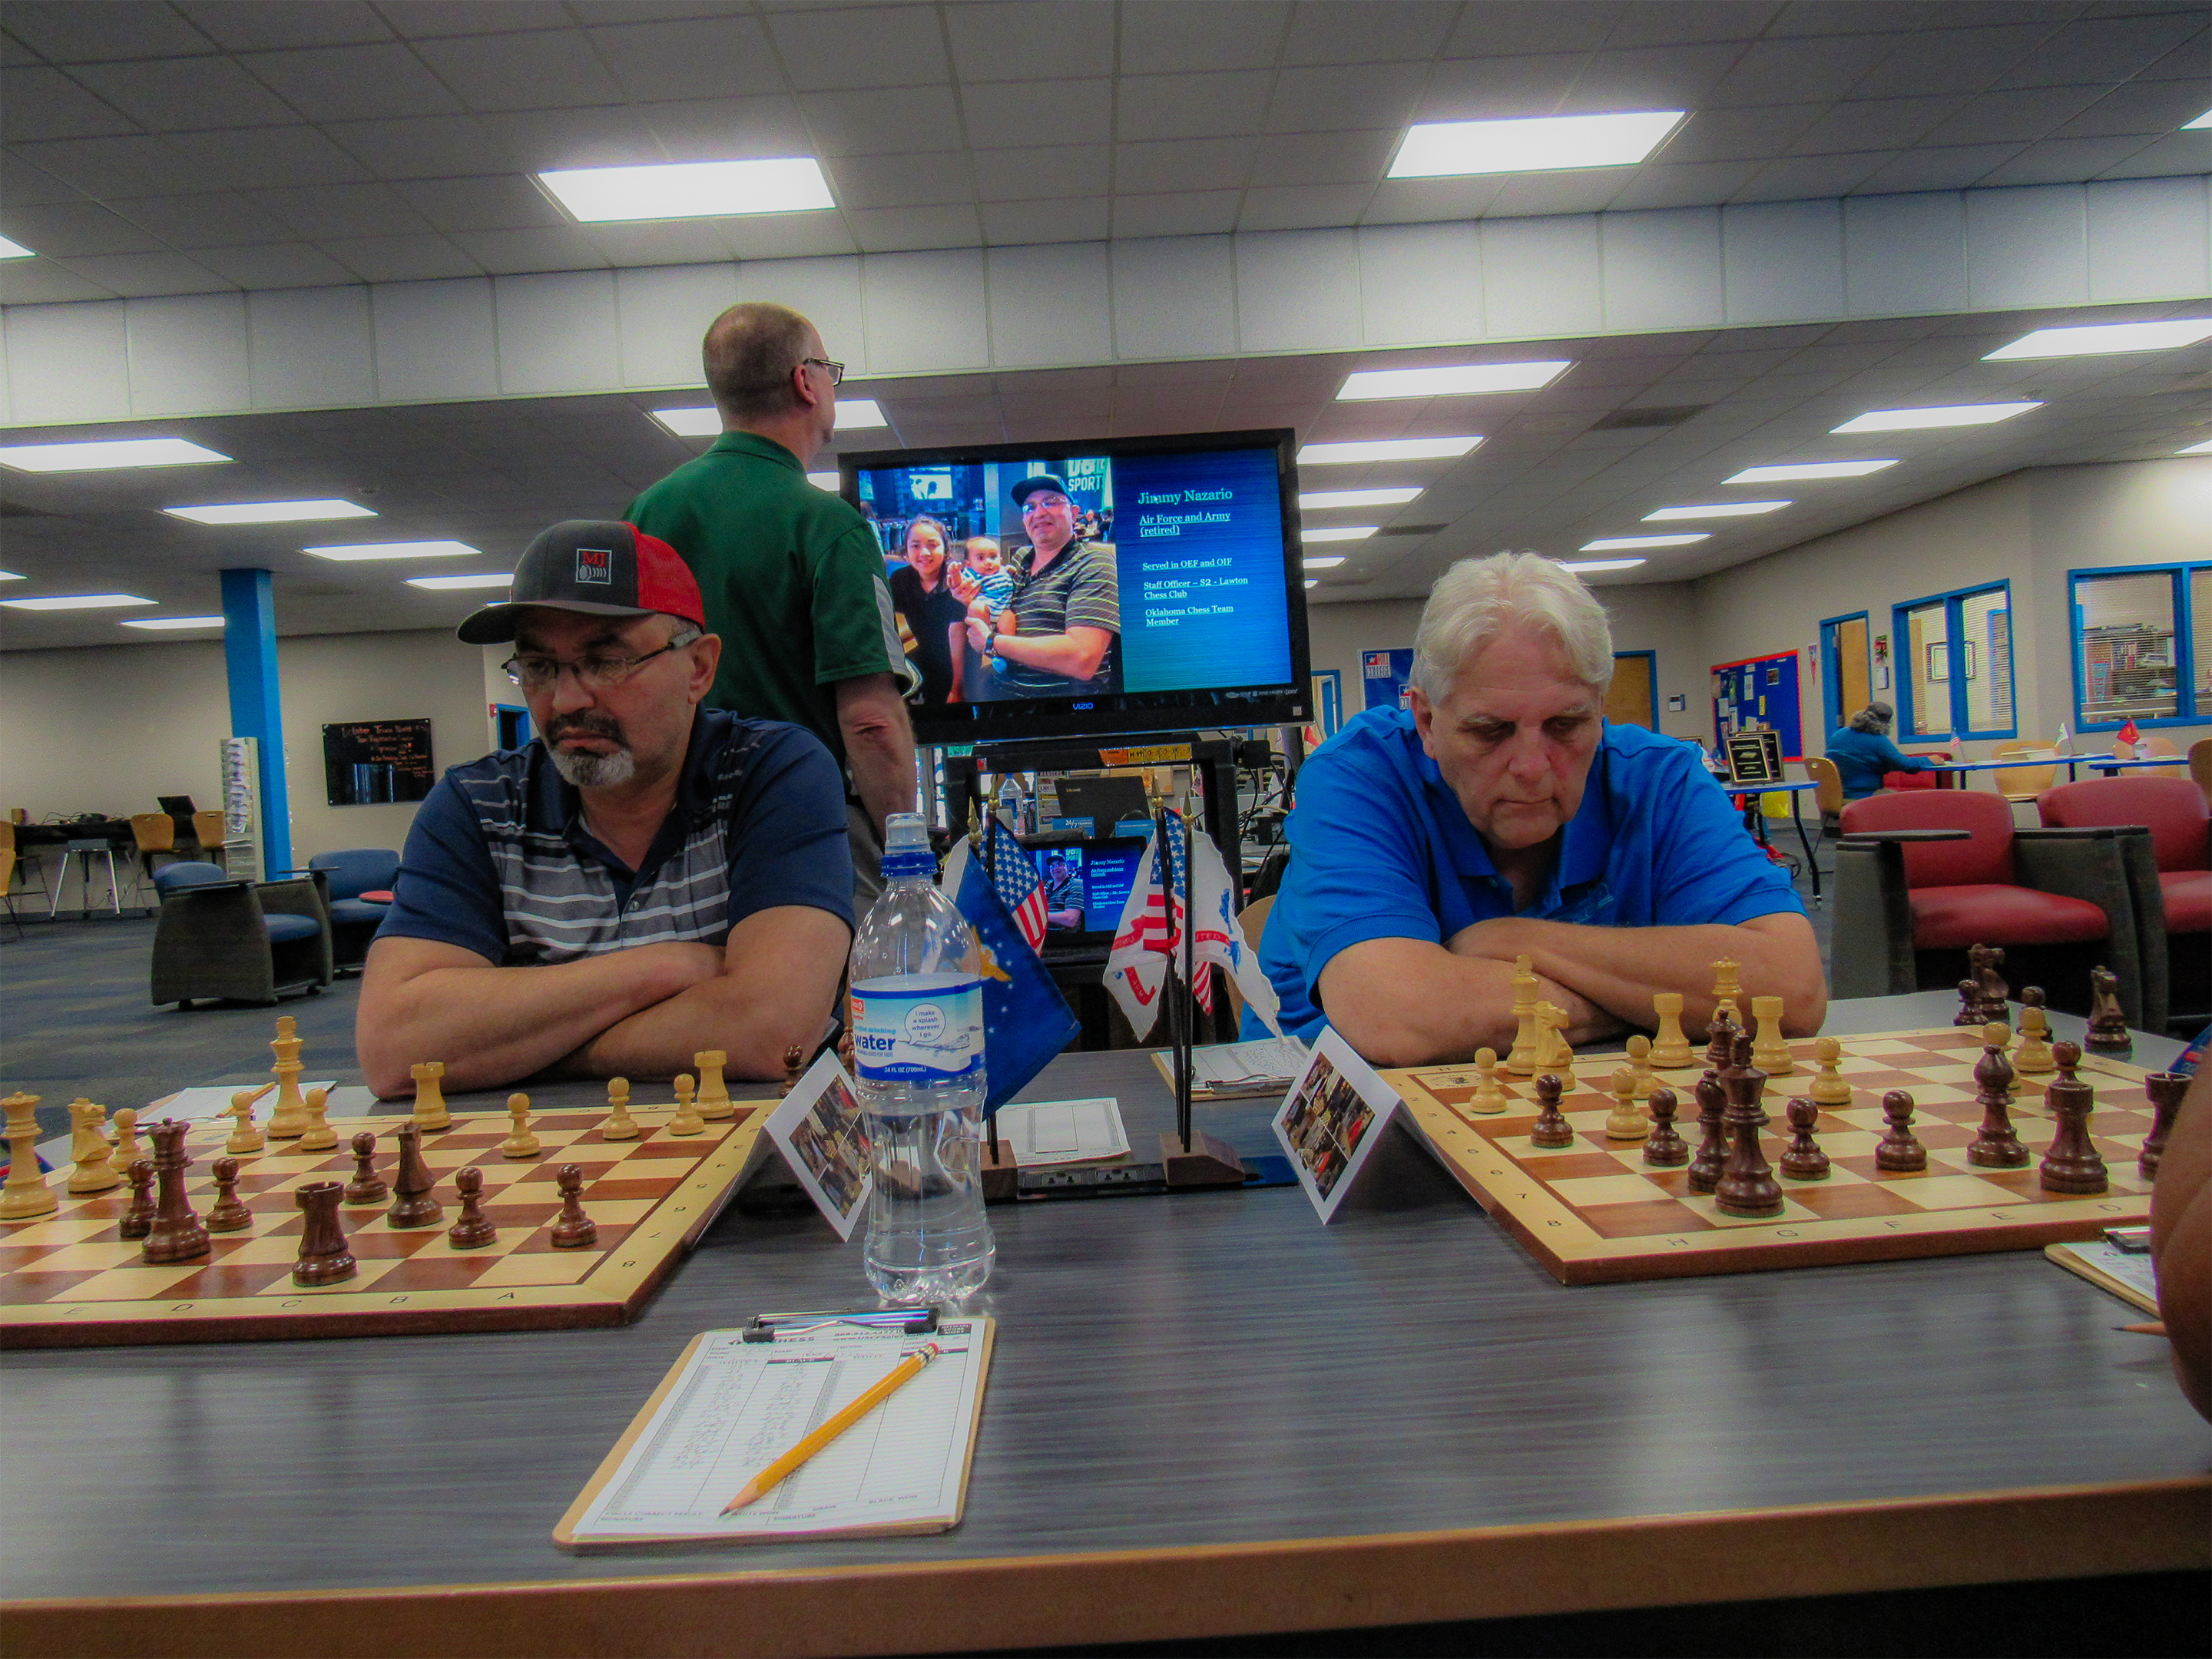 Air Force/Army Retiree Jimmy Nazario (left) and Army Veteran Troy Gillispie (right) doing battle side-by-side.  In the background Chess Expert Ron Farrar observes a continuously running slideshow about this Championship.  Photo by Sheryl McBroom.